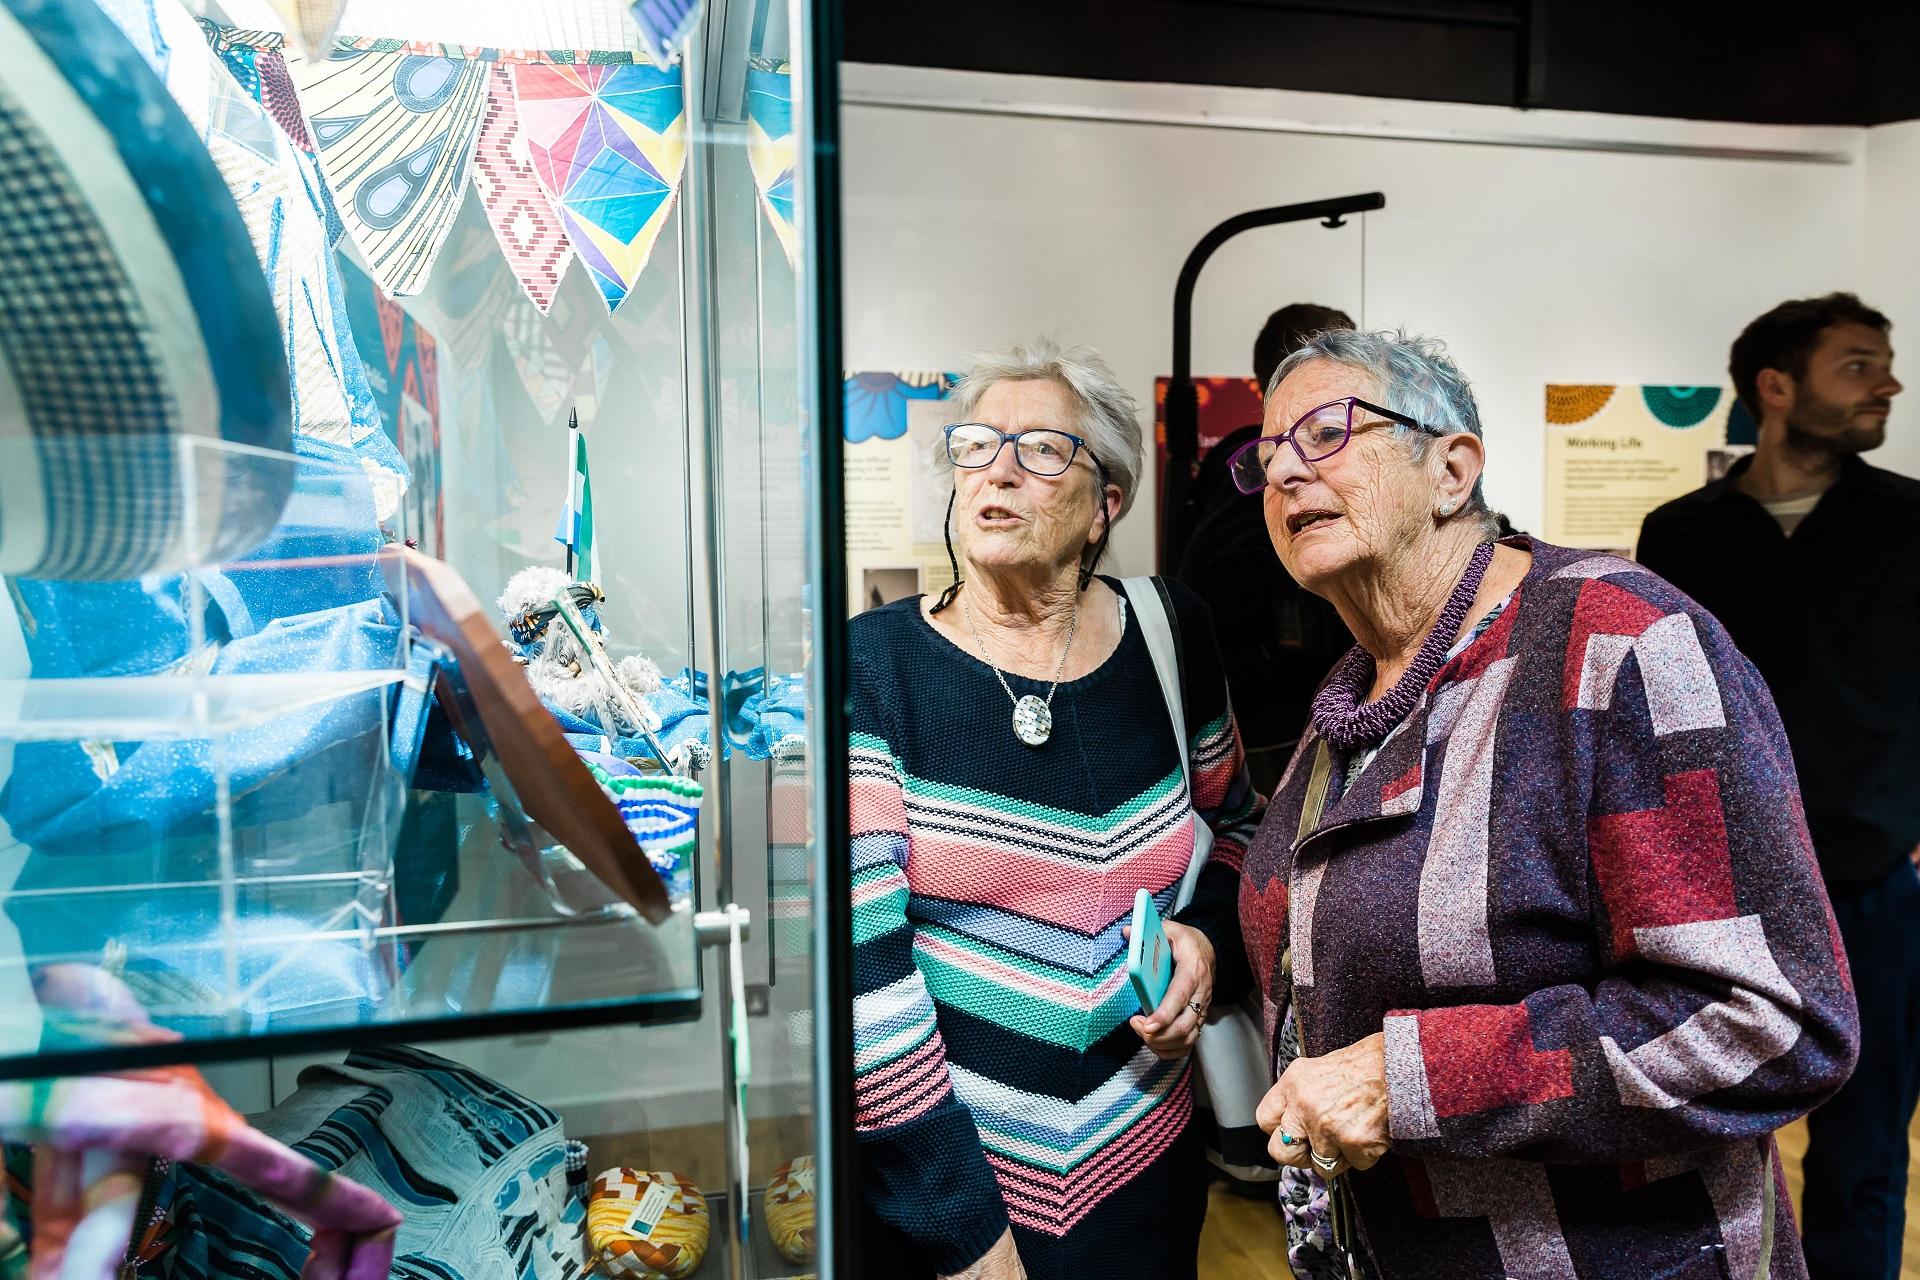 Two women looking at objects in a glass display case.